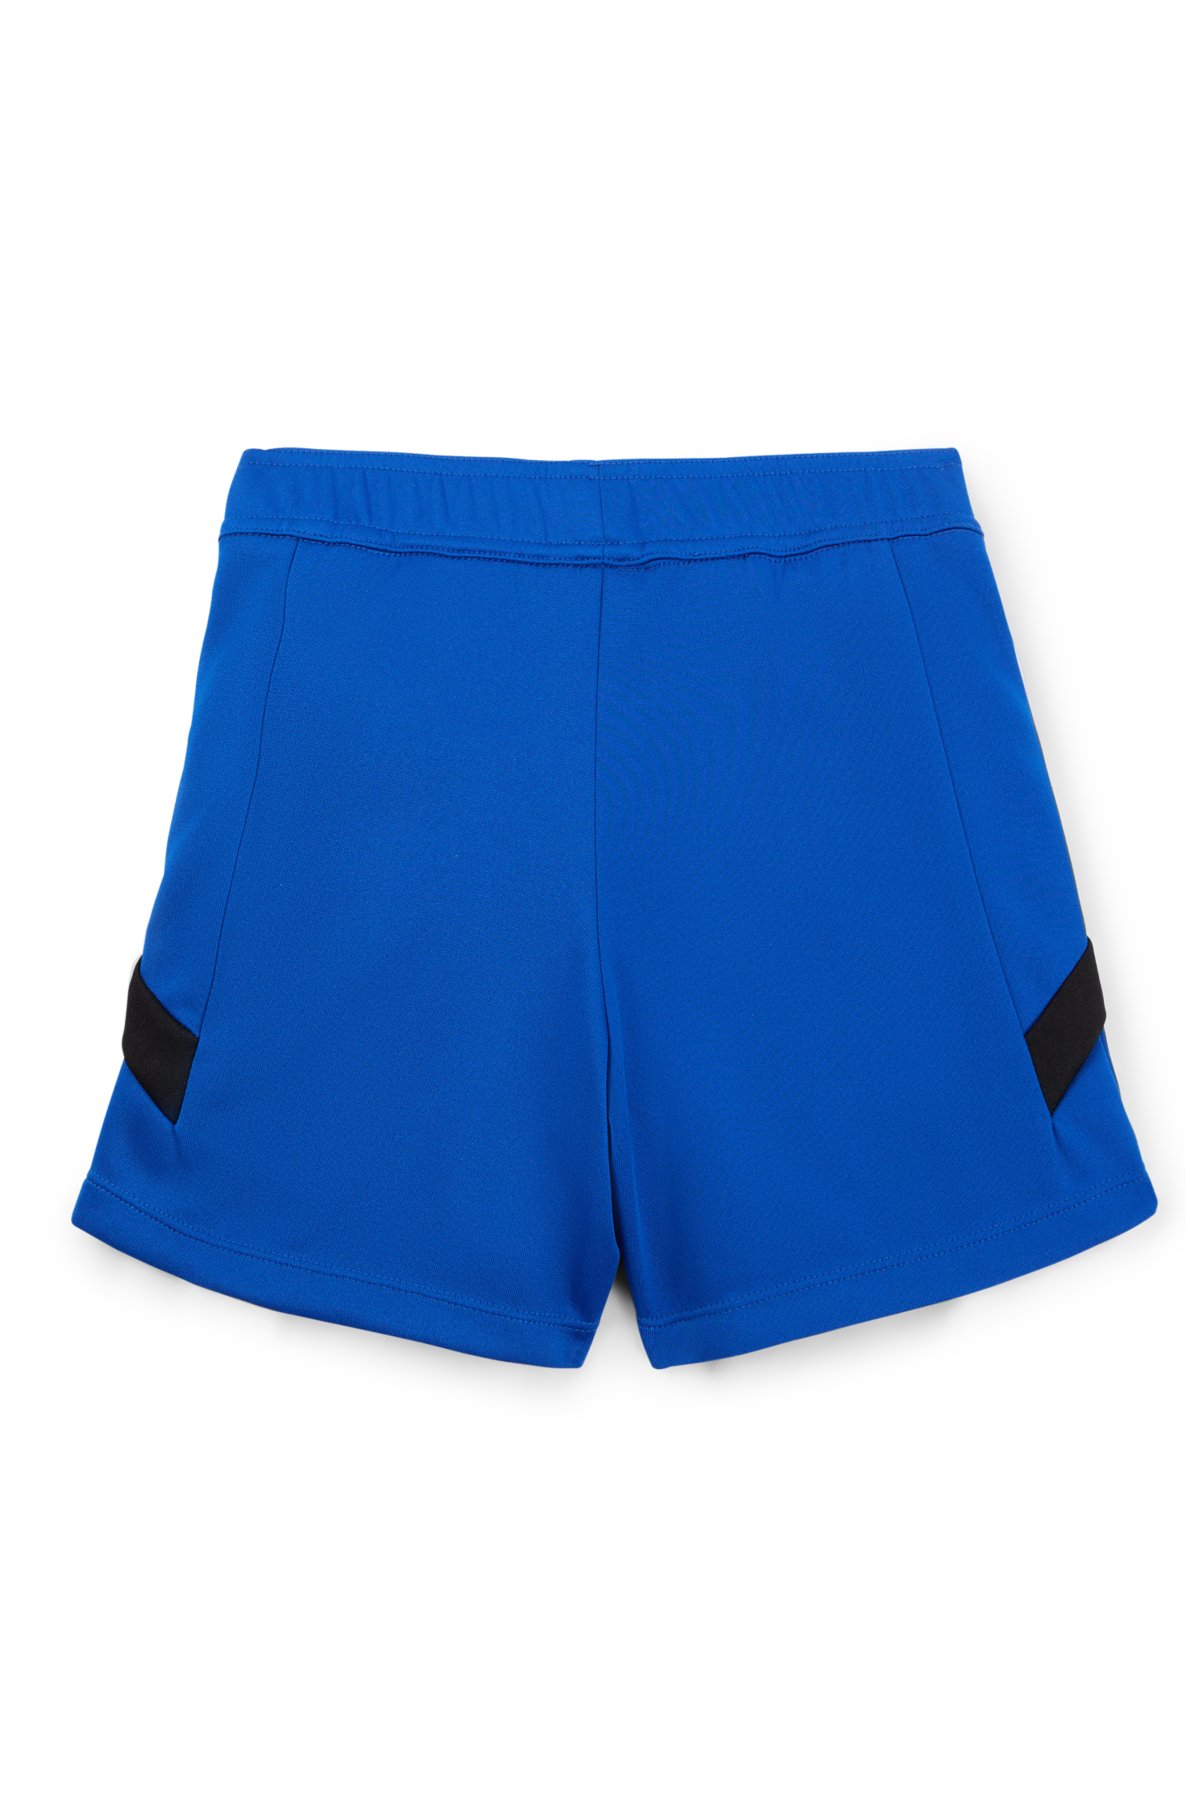 Kids' shorts with signature details, Blue